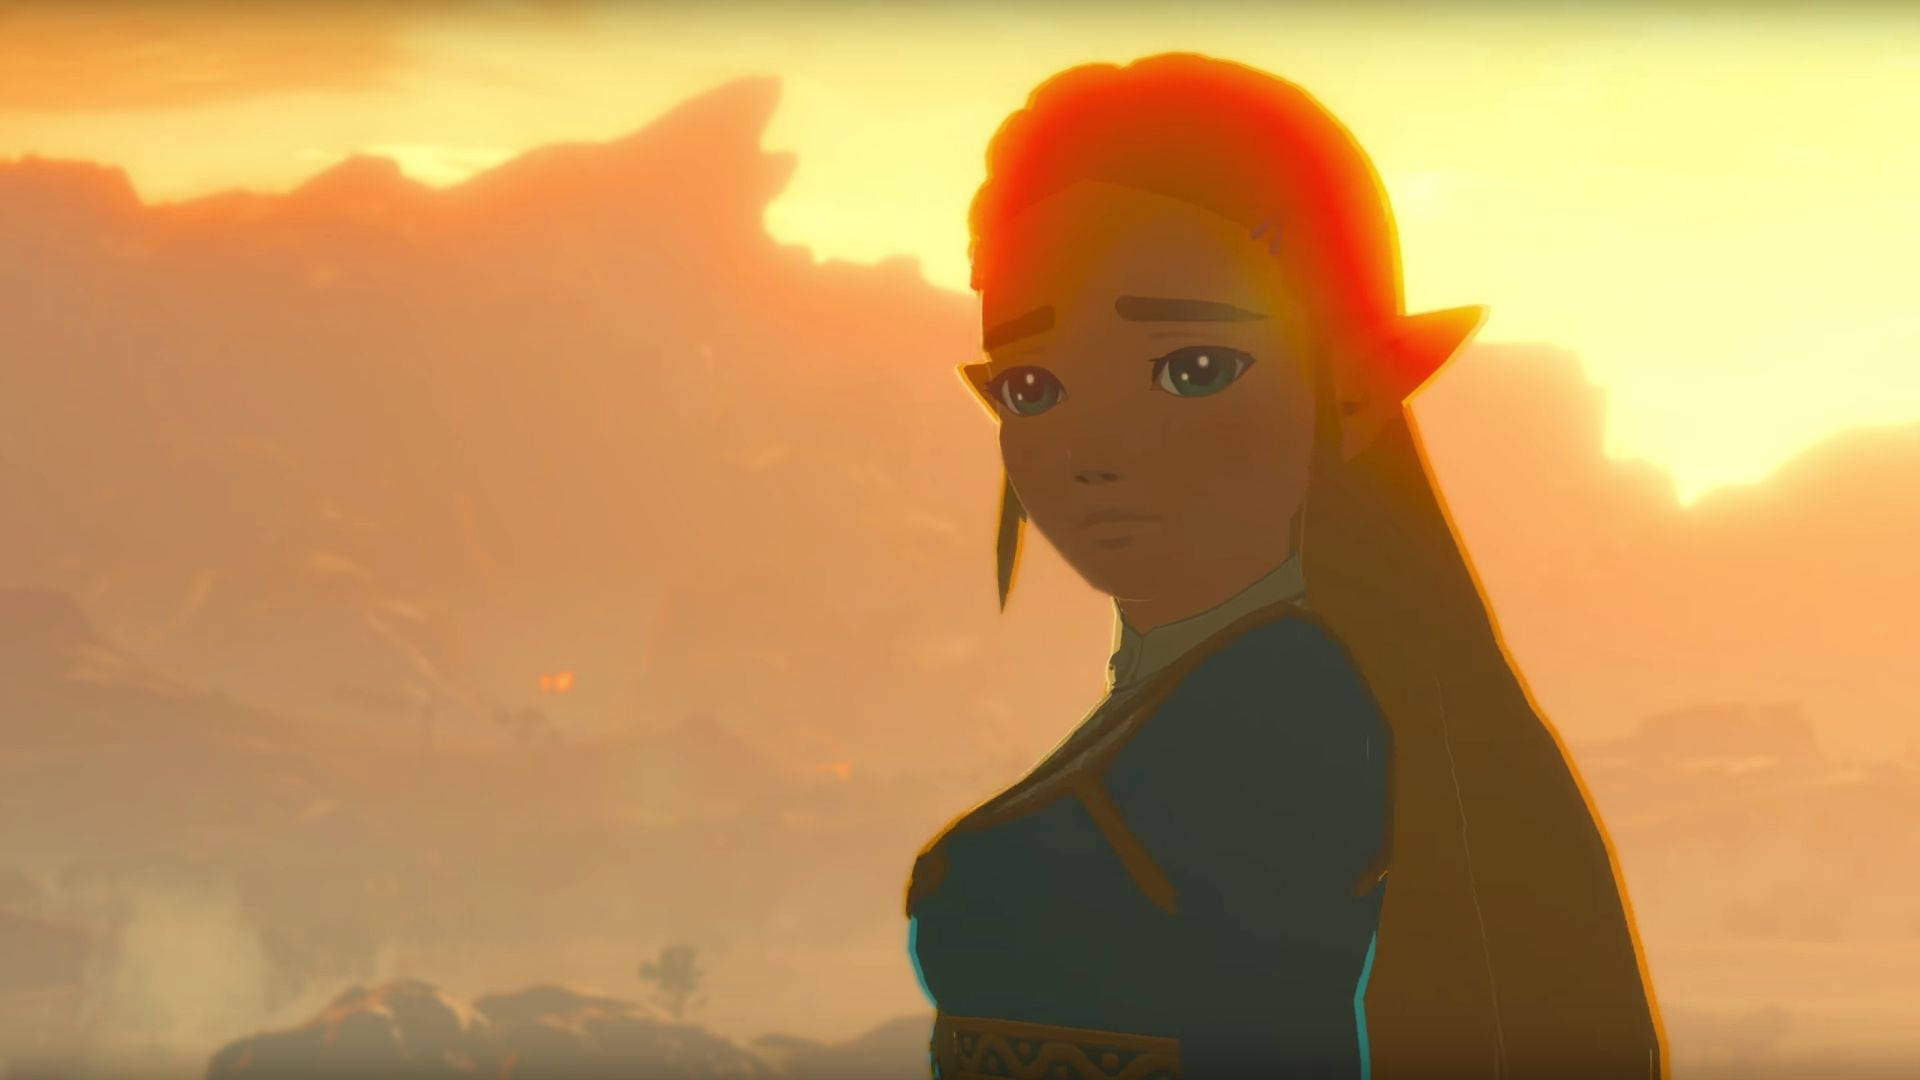 Princess Zelda embarks on a journey to save Hyrule in The Legend of Zelda: Breath of the Wild Wallpaper